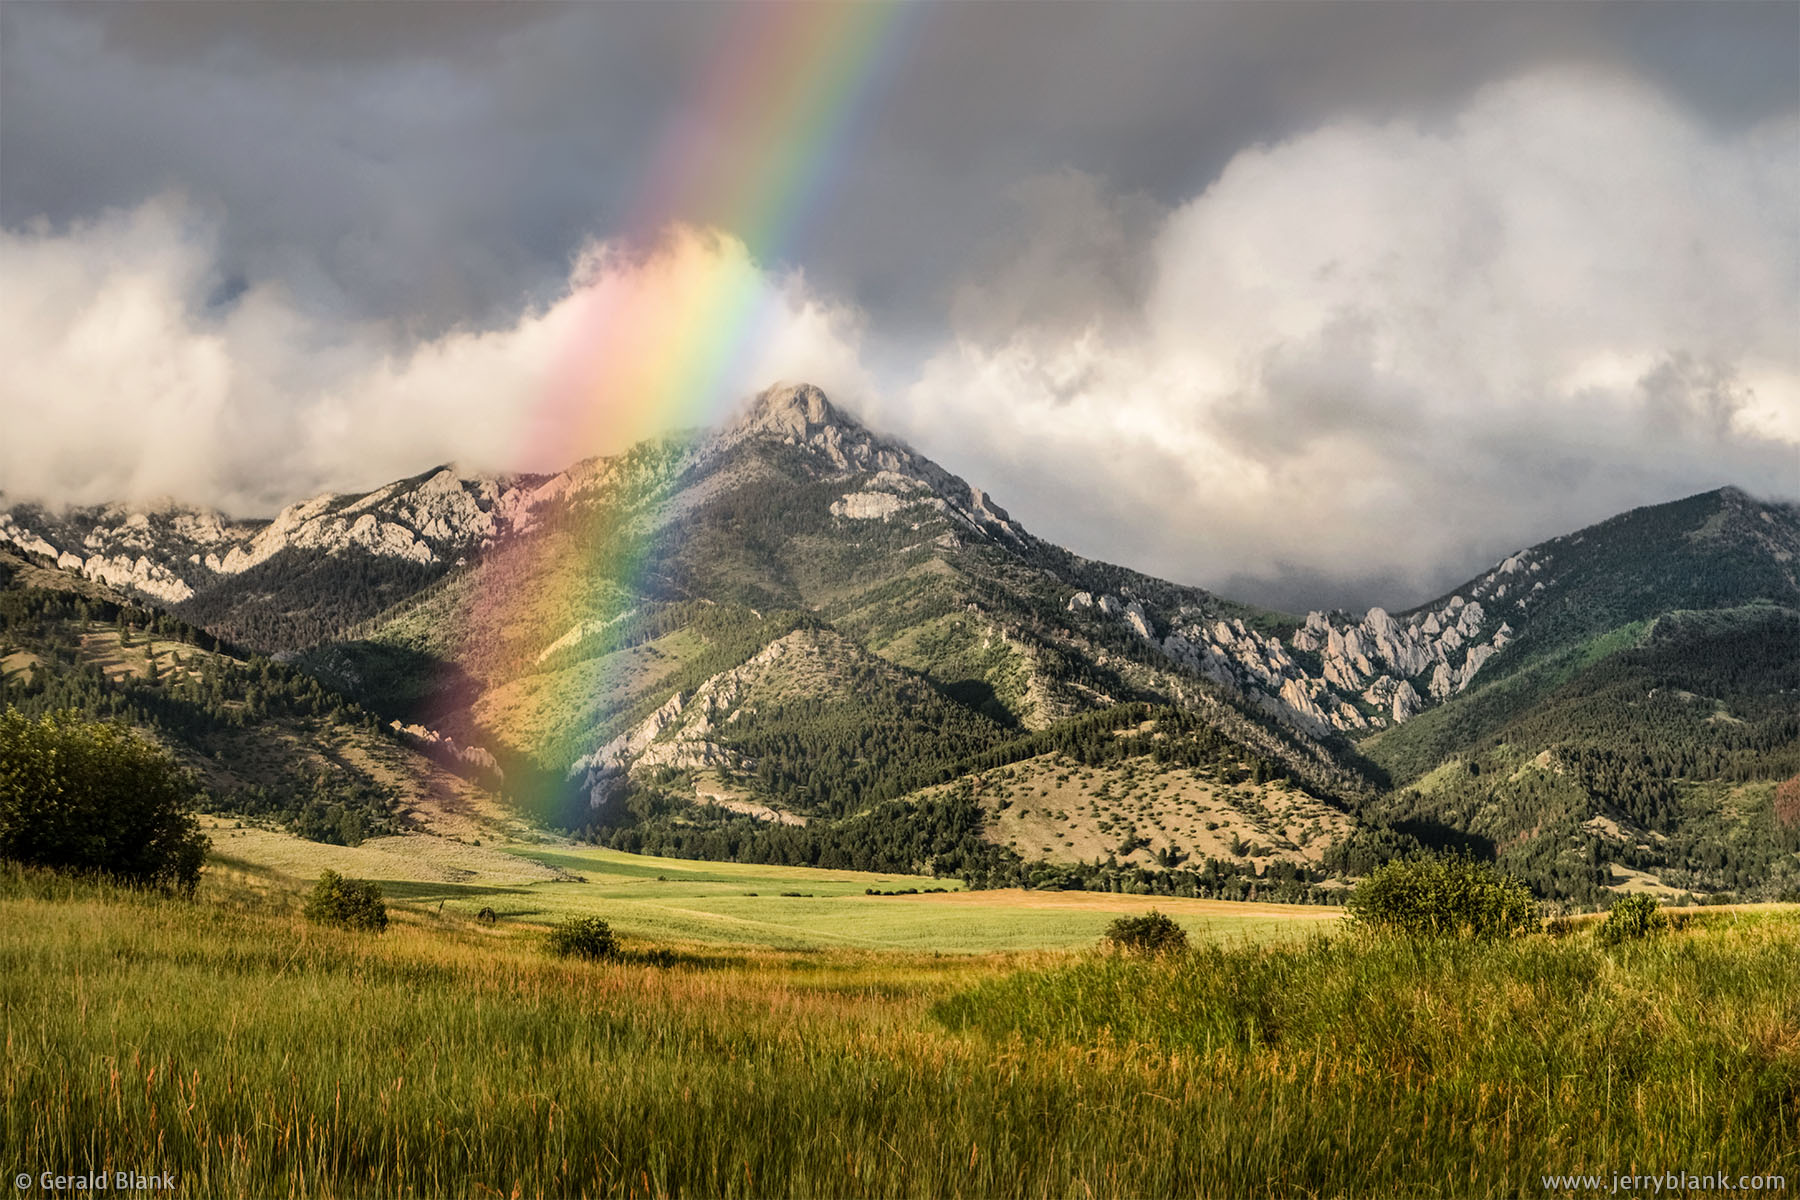 #09914 - Telephoto shot of “the end of the rainbow” at the base of Ross Peak, in Montana’s Bridger Mountains - photo by Jerry Blank